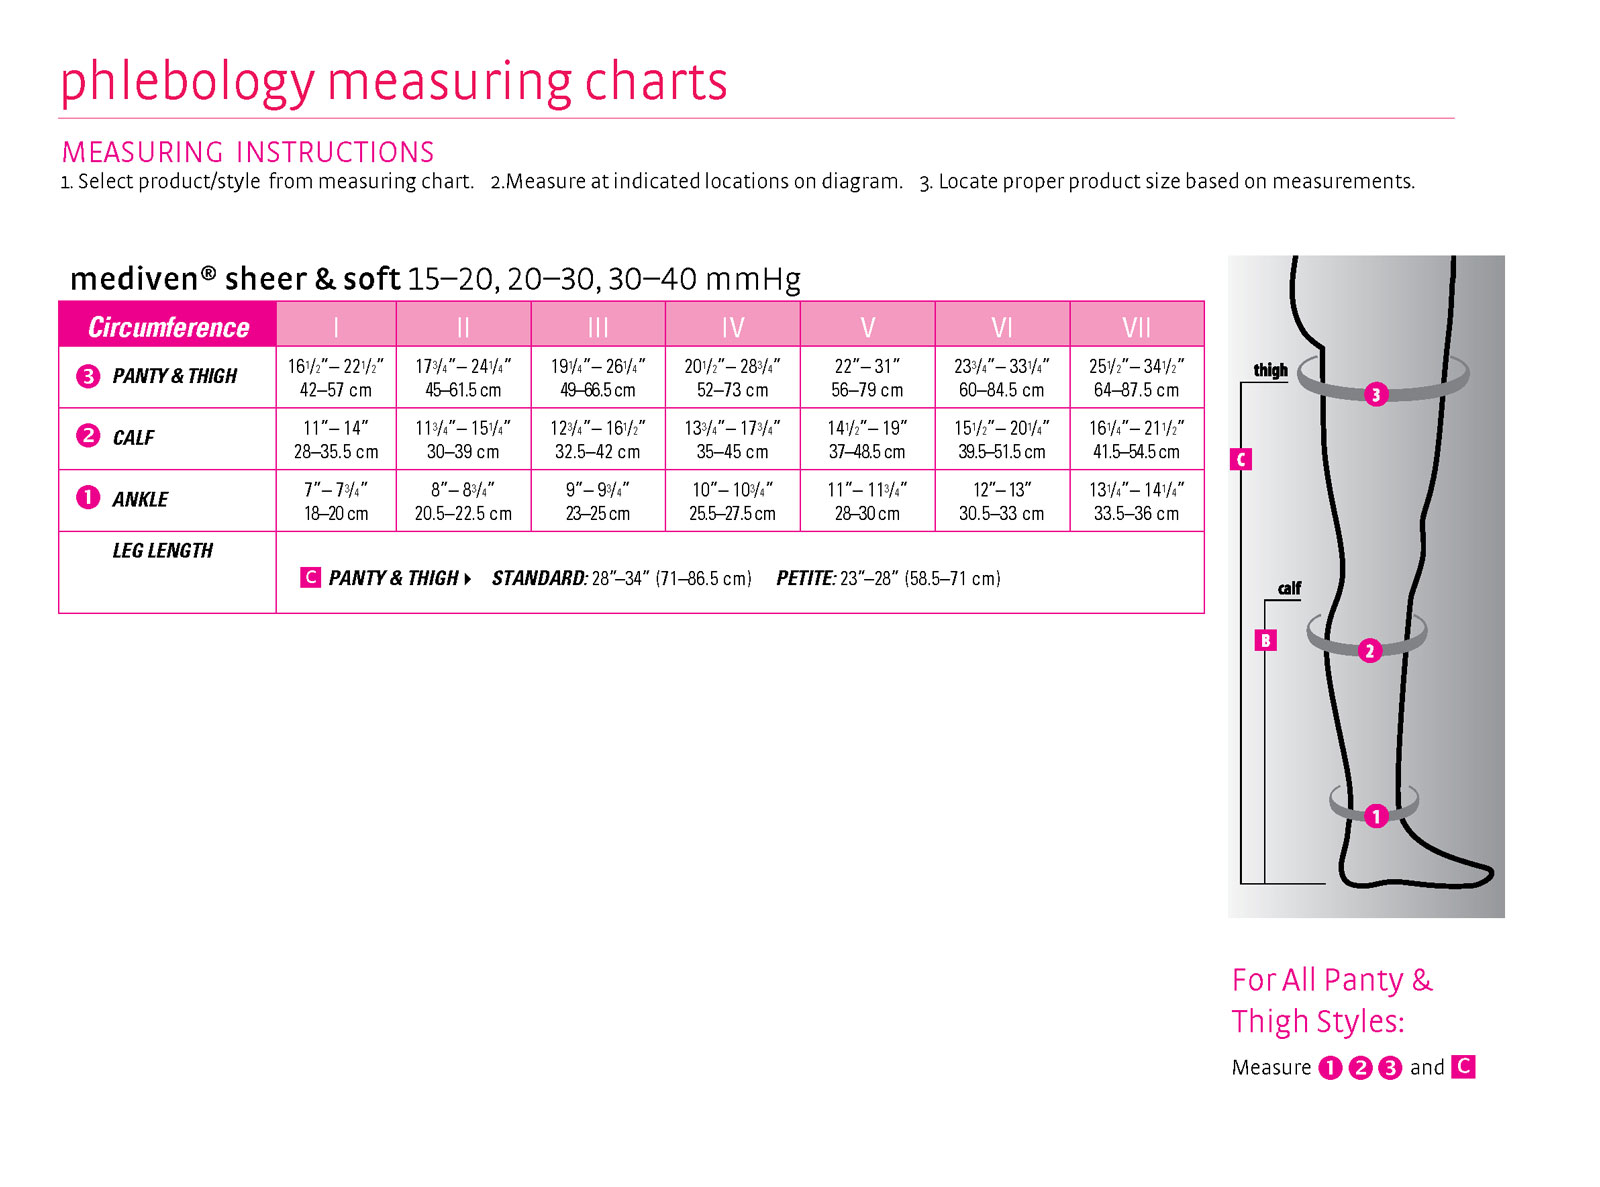 mediven sheer and soft size chart